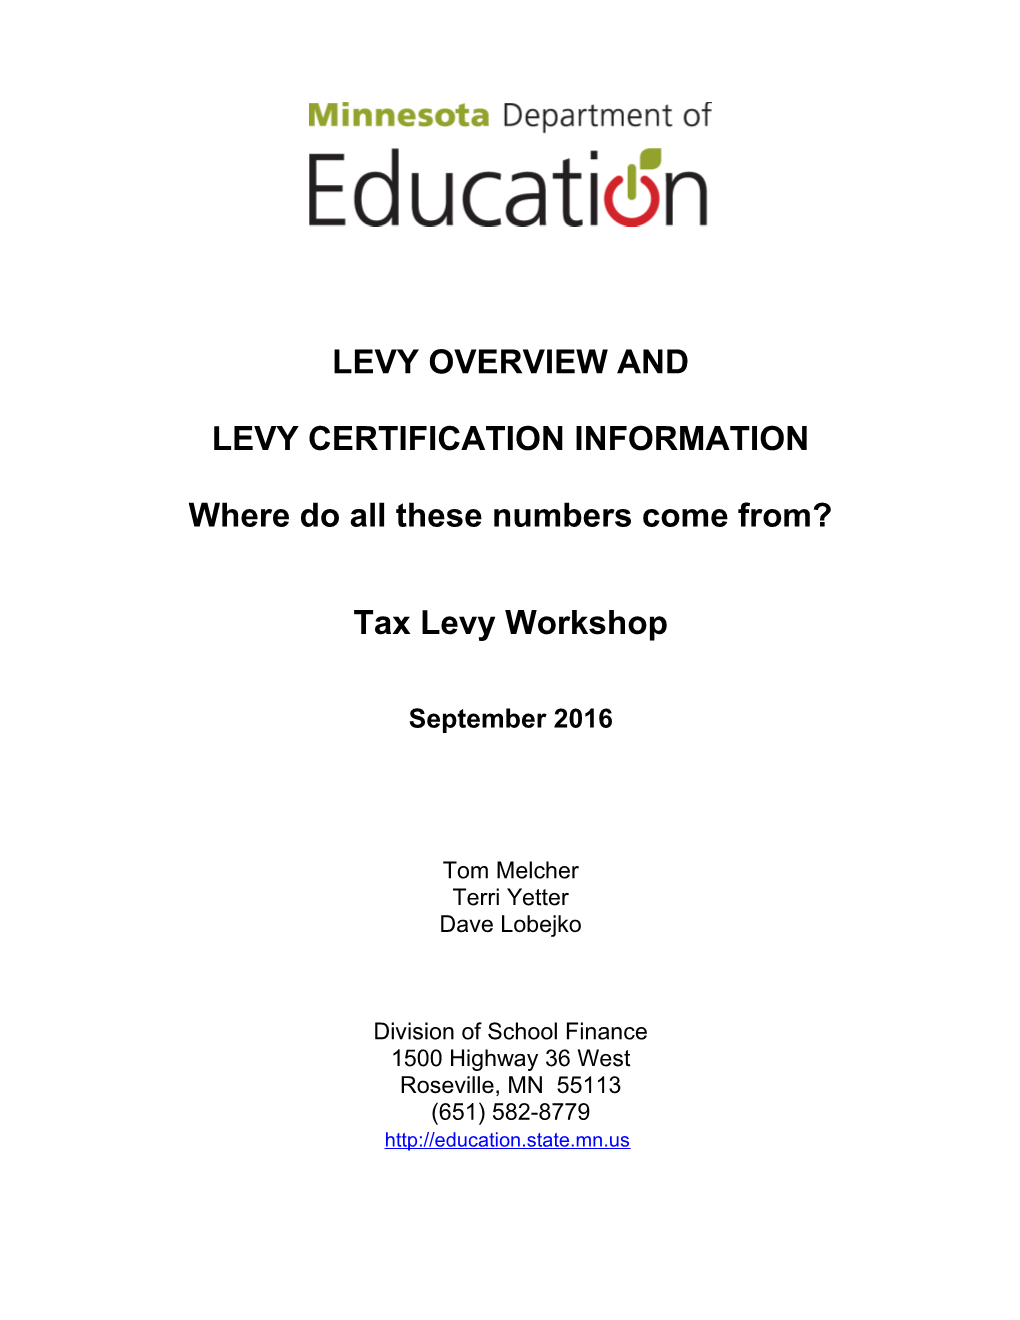 This Memo Describes the Information That Is Available to You for Your Levy Certification Process